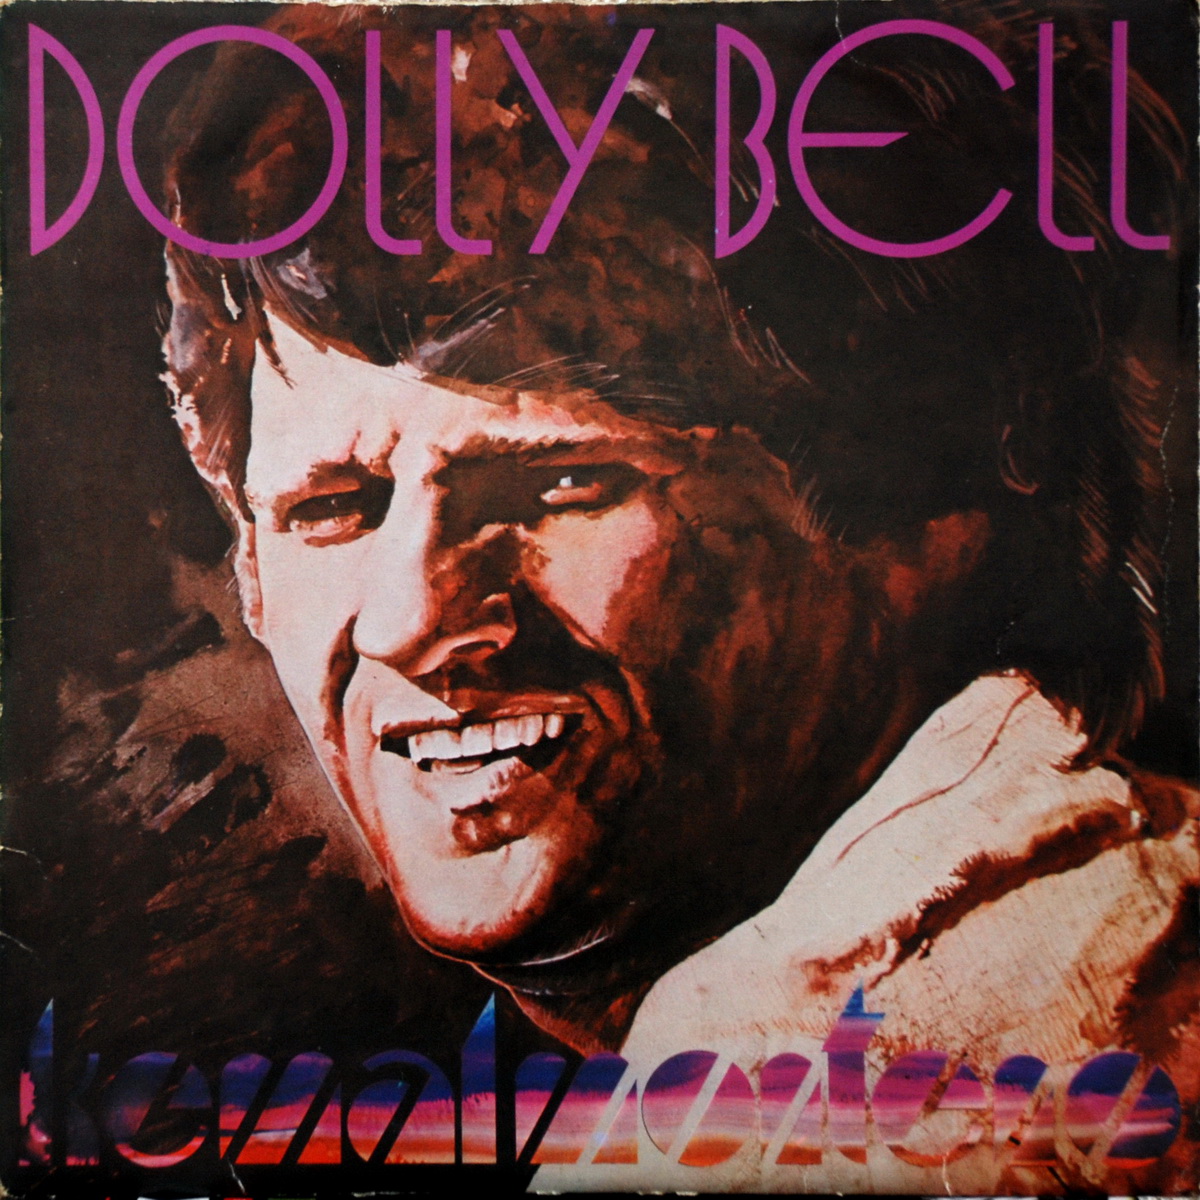 Kemal Monteno 1982 Dolly Bell a